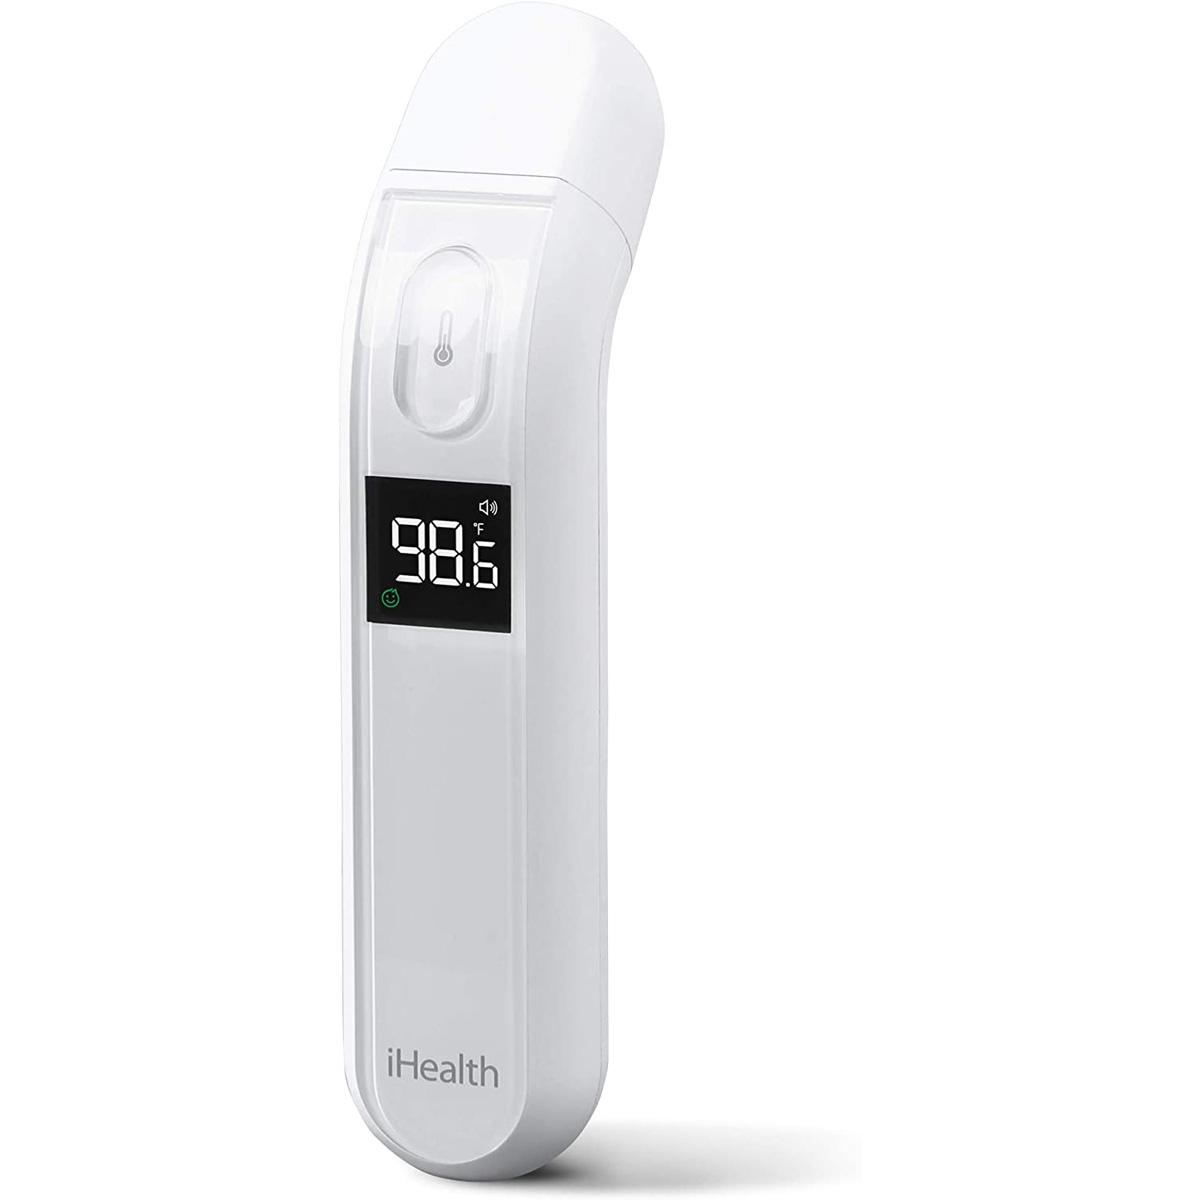 iHealth Forehead Thermometer for $9.99